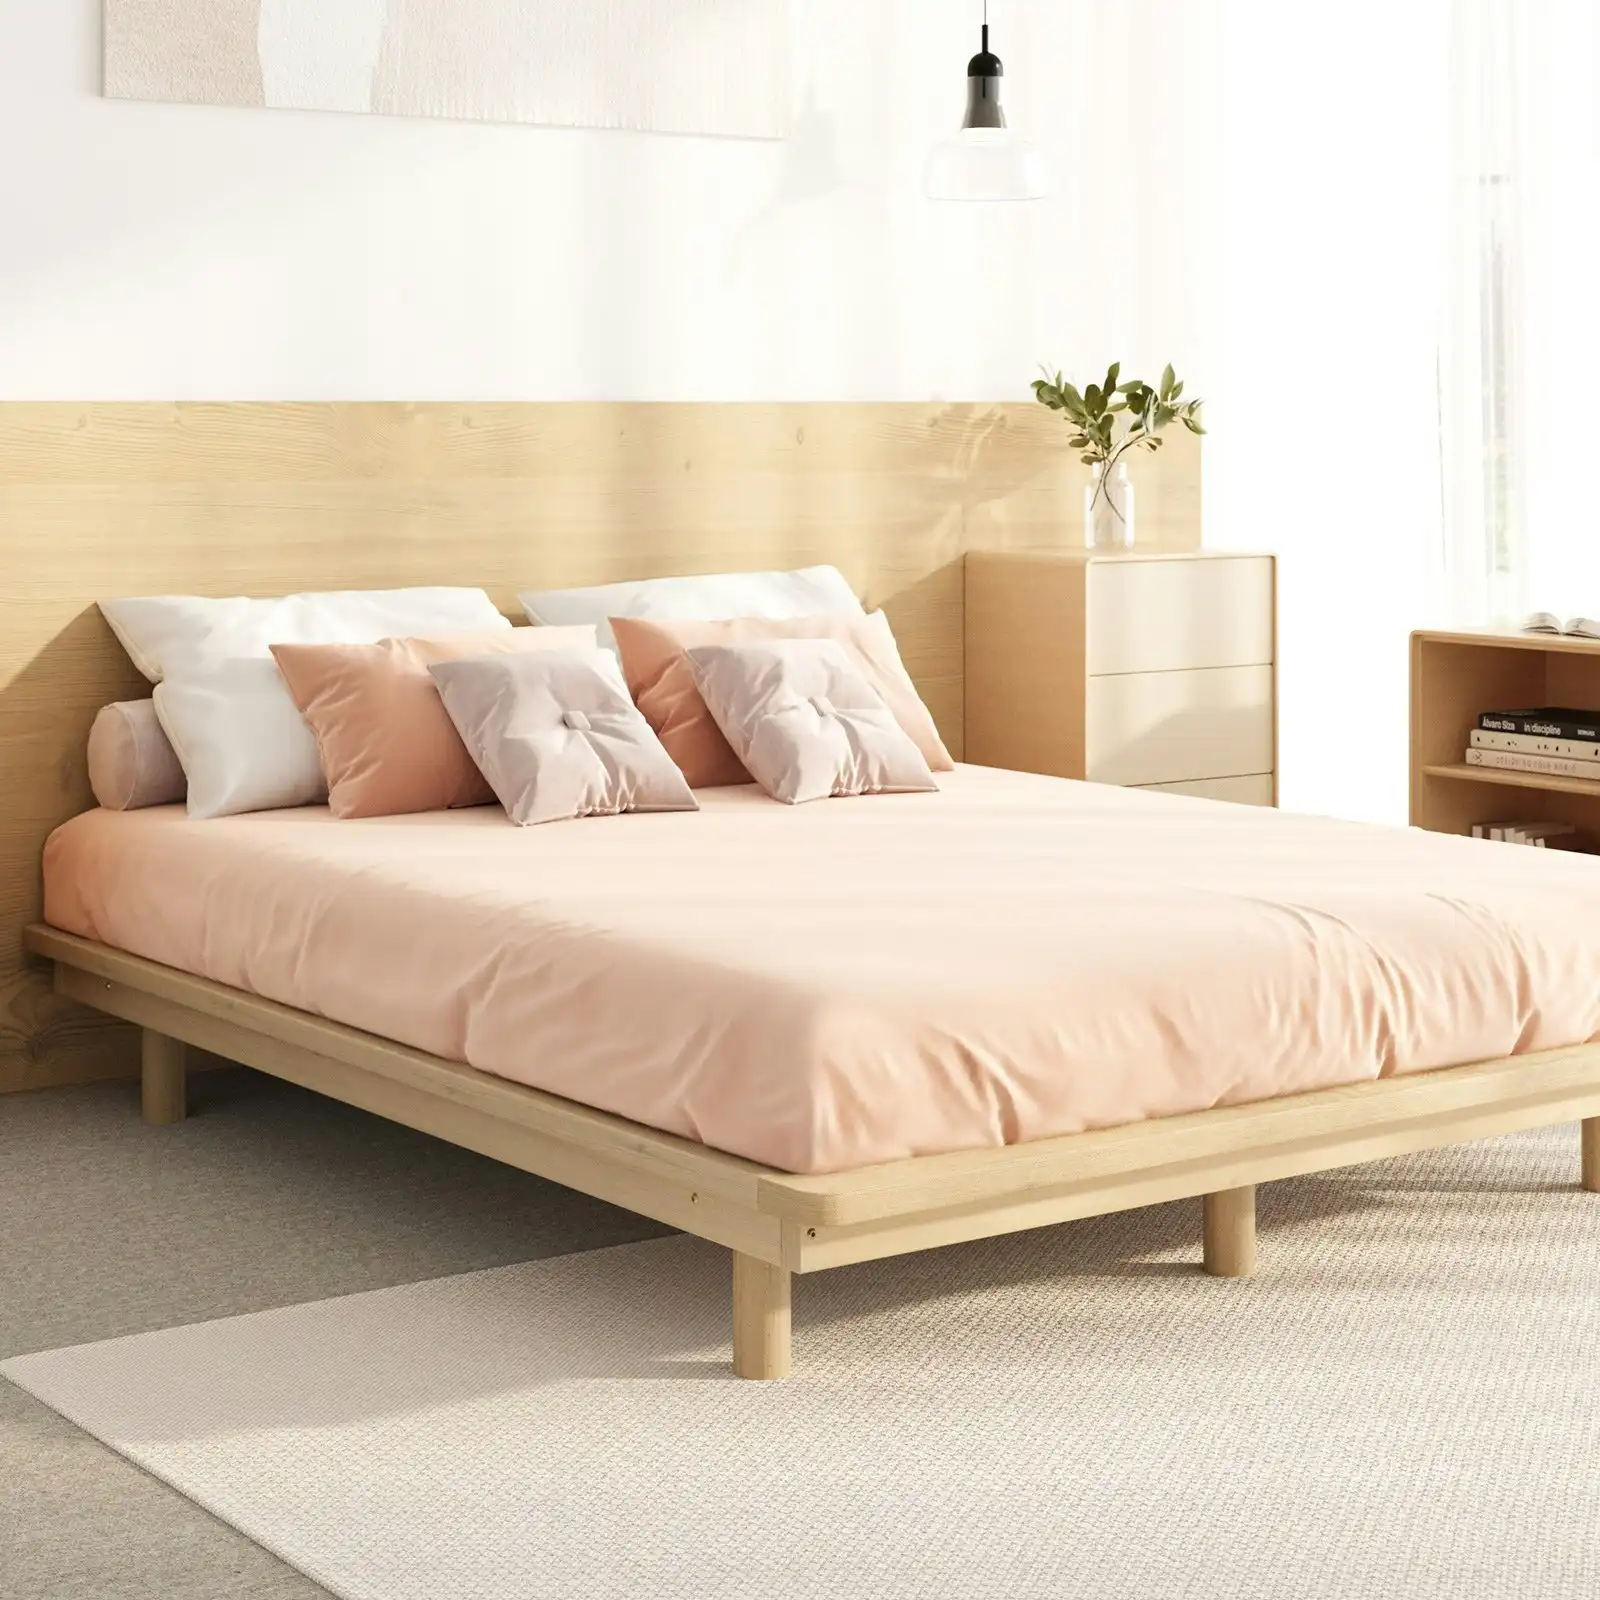 Oikiture Bed Frame Double Size Wooden Bed Base Floating